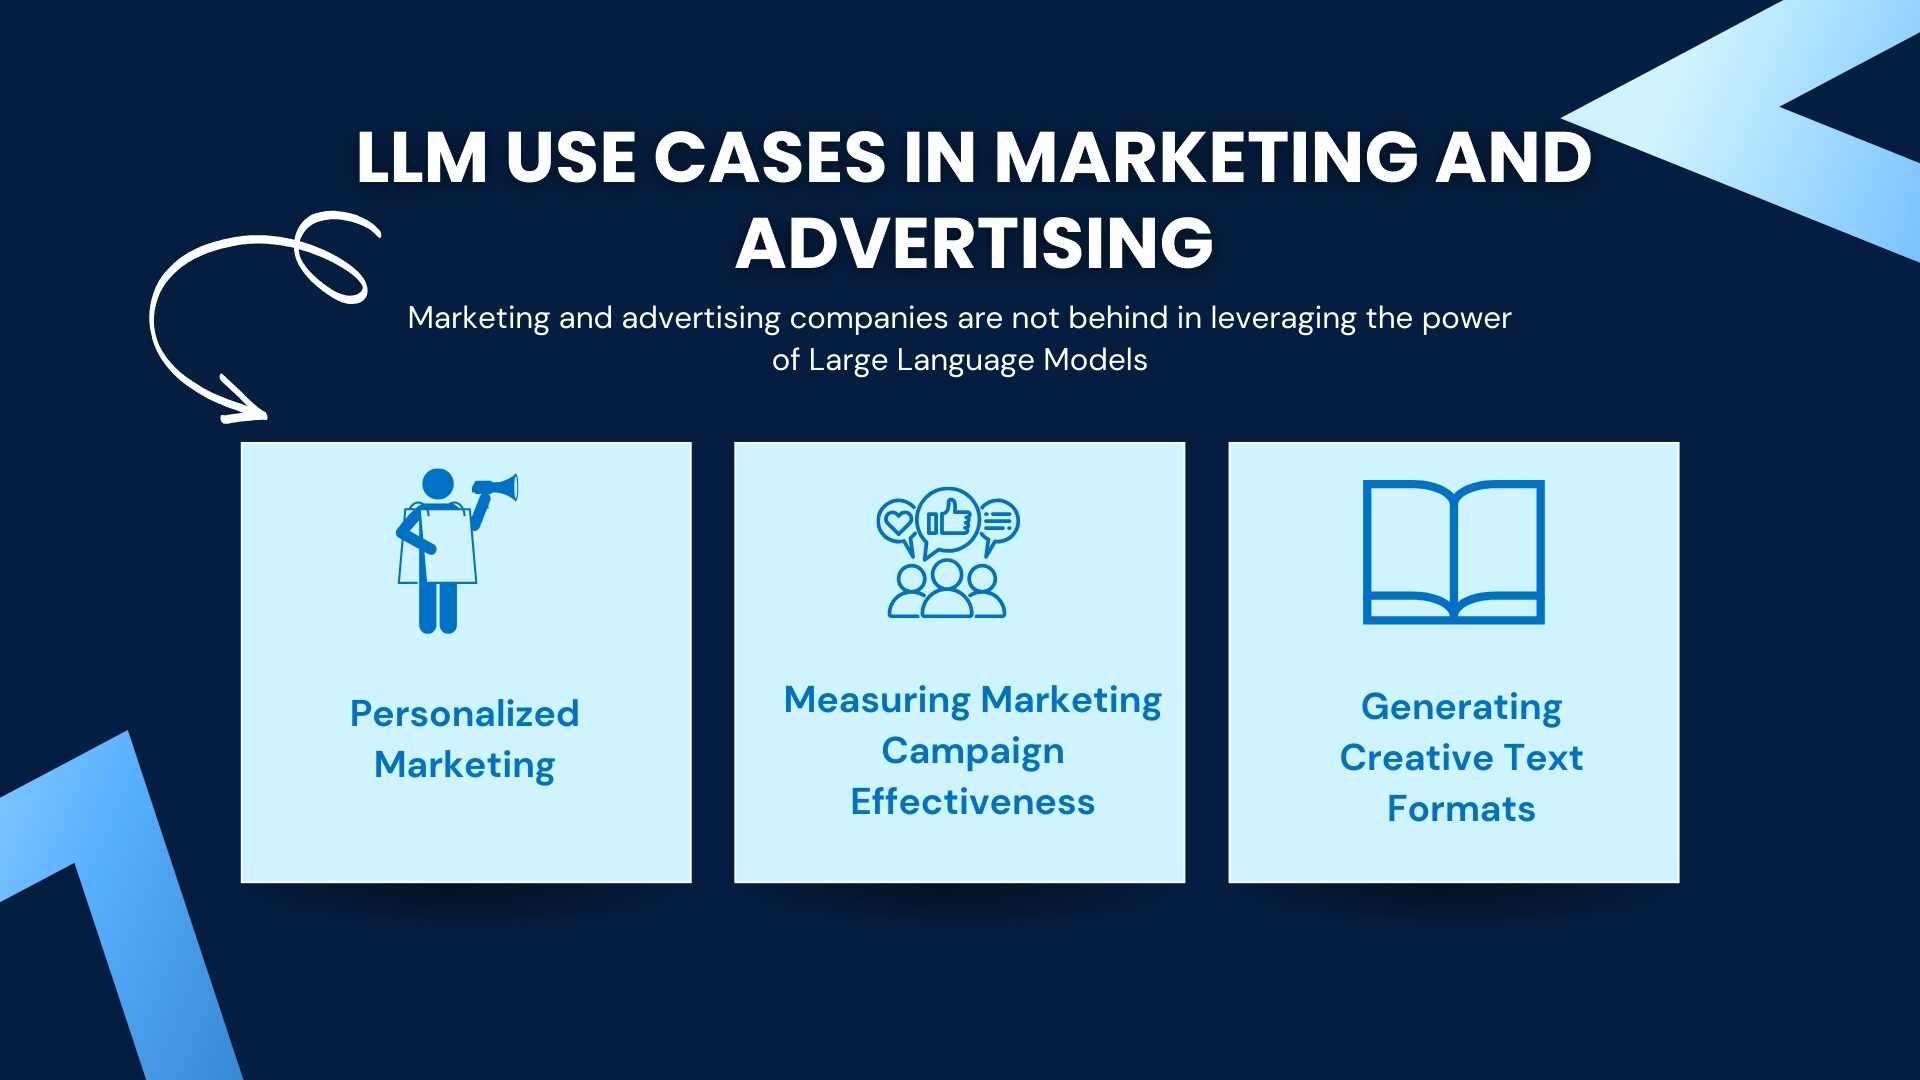 LLM Use Cases in Marketing and Advertising